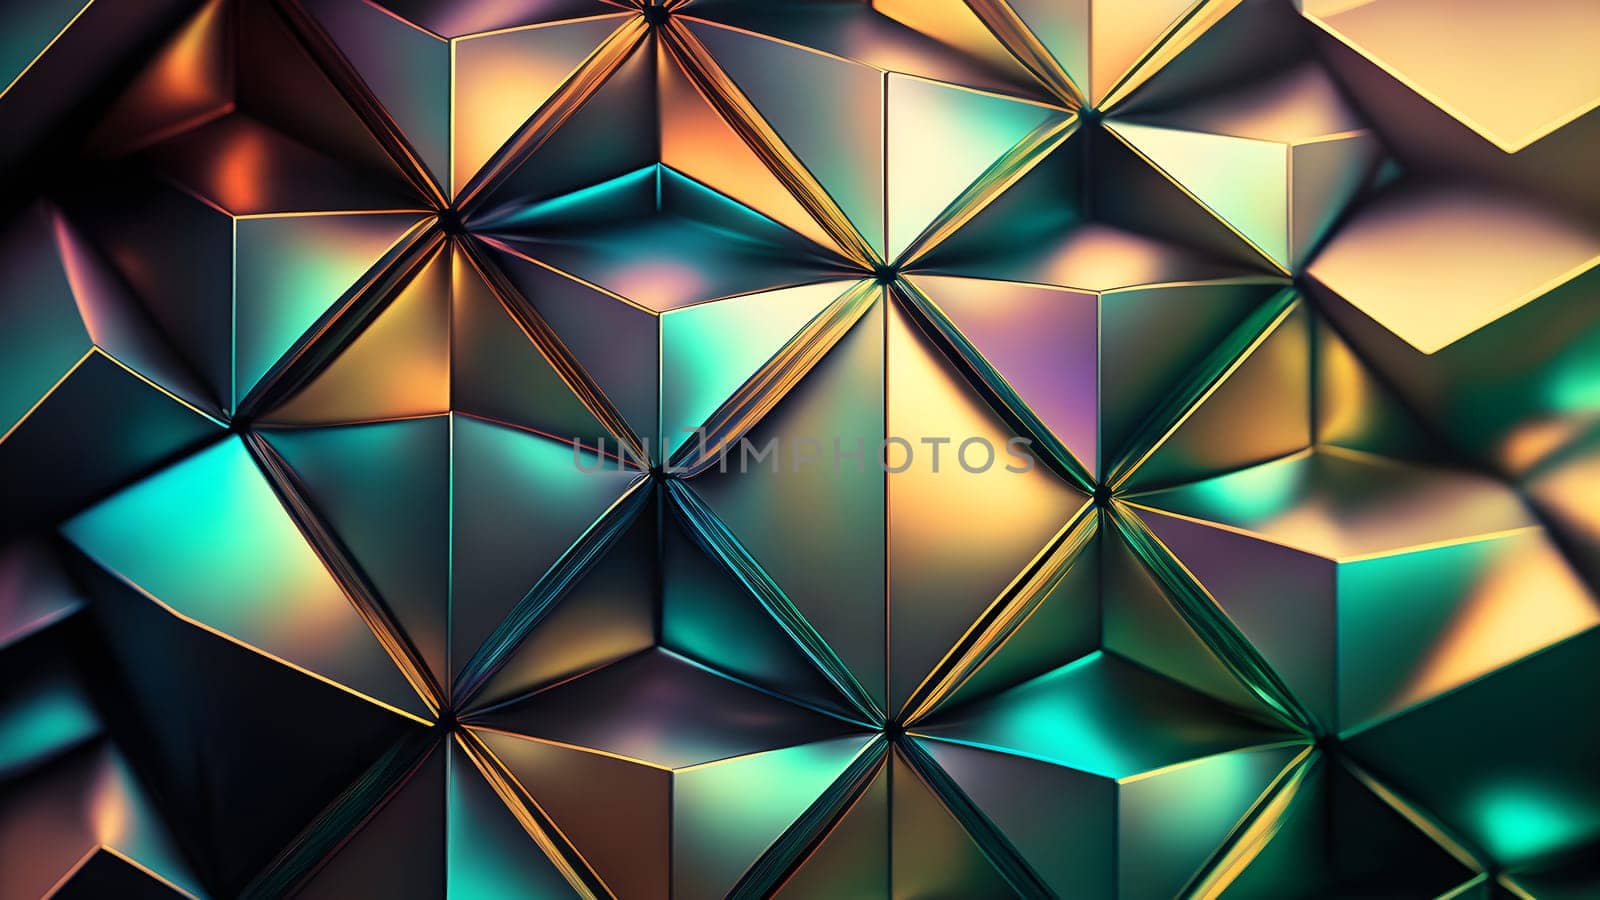 texture and abstract full-frame background of iridescent metal, neural network generated art. Digitally generated image. Not based on any actual scene or pattern.